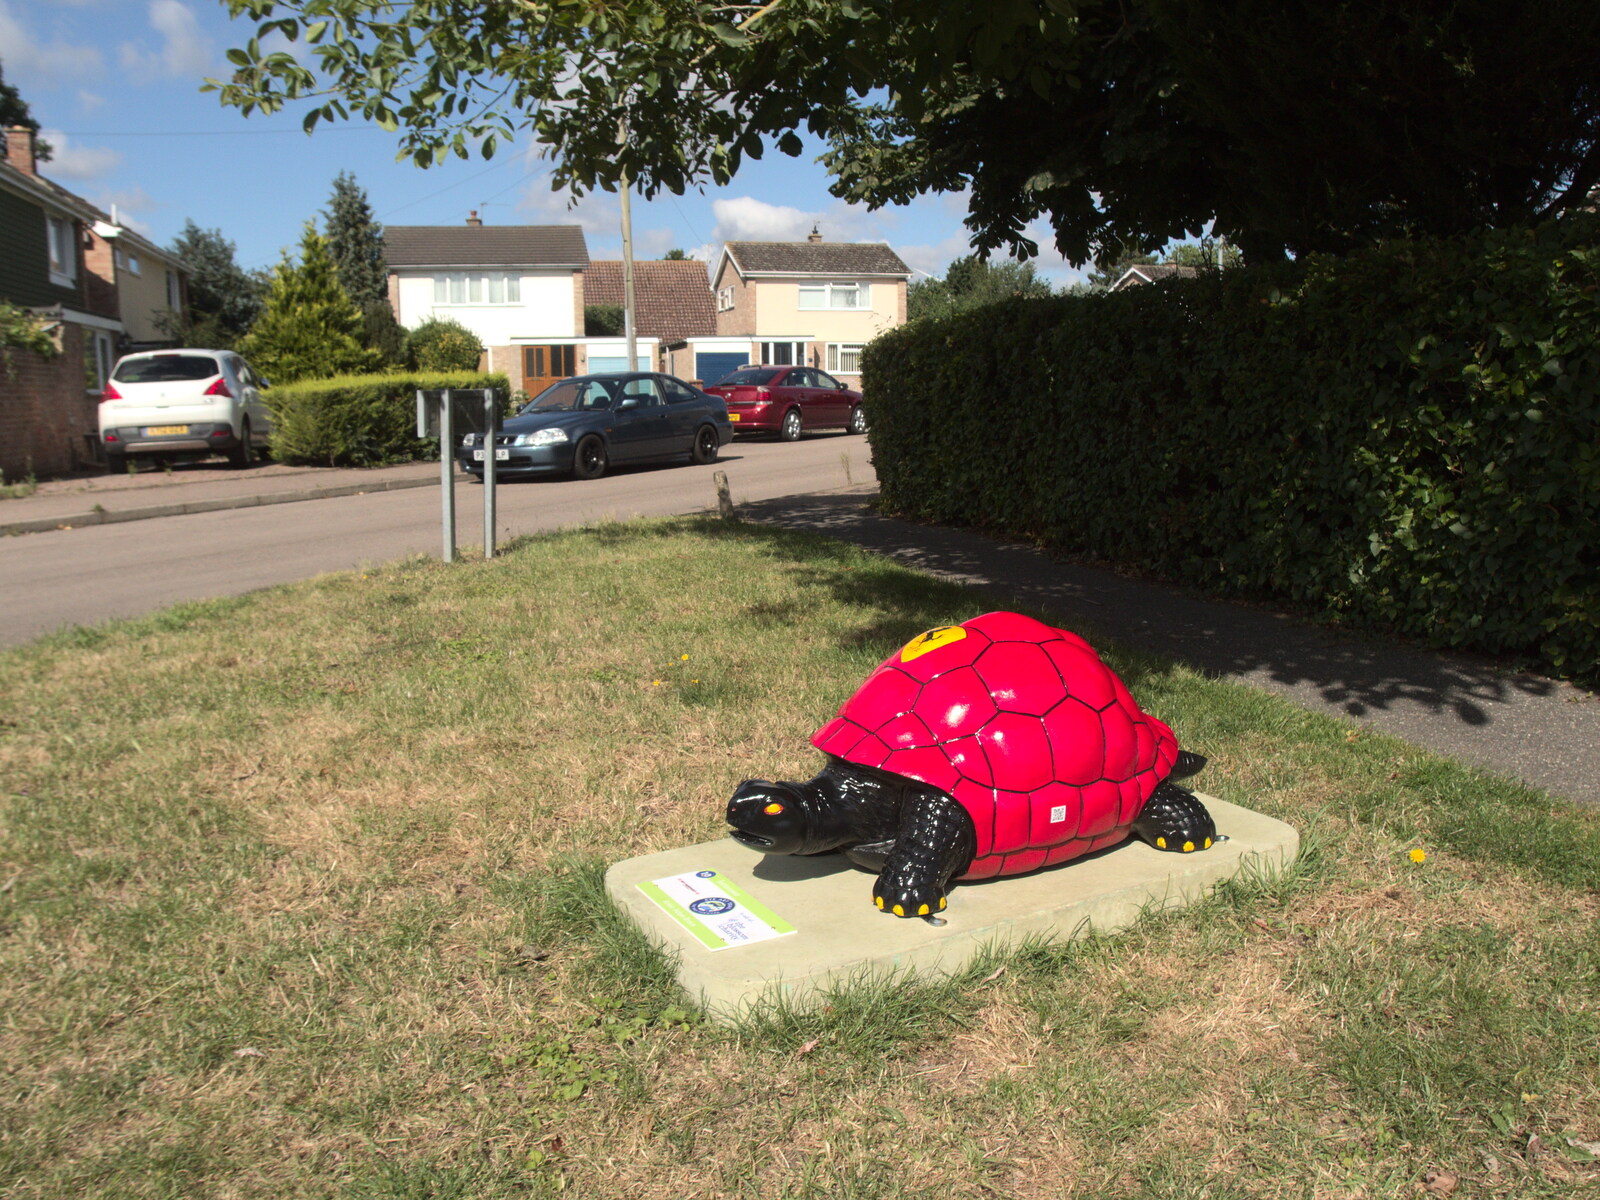 A Black and Red Ferrari hare on Millfield from Meg-fest, and Sean Visits, Bressingham and Brome, Suffolk - 1st August 2021